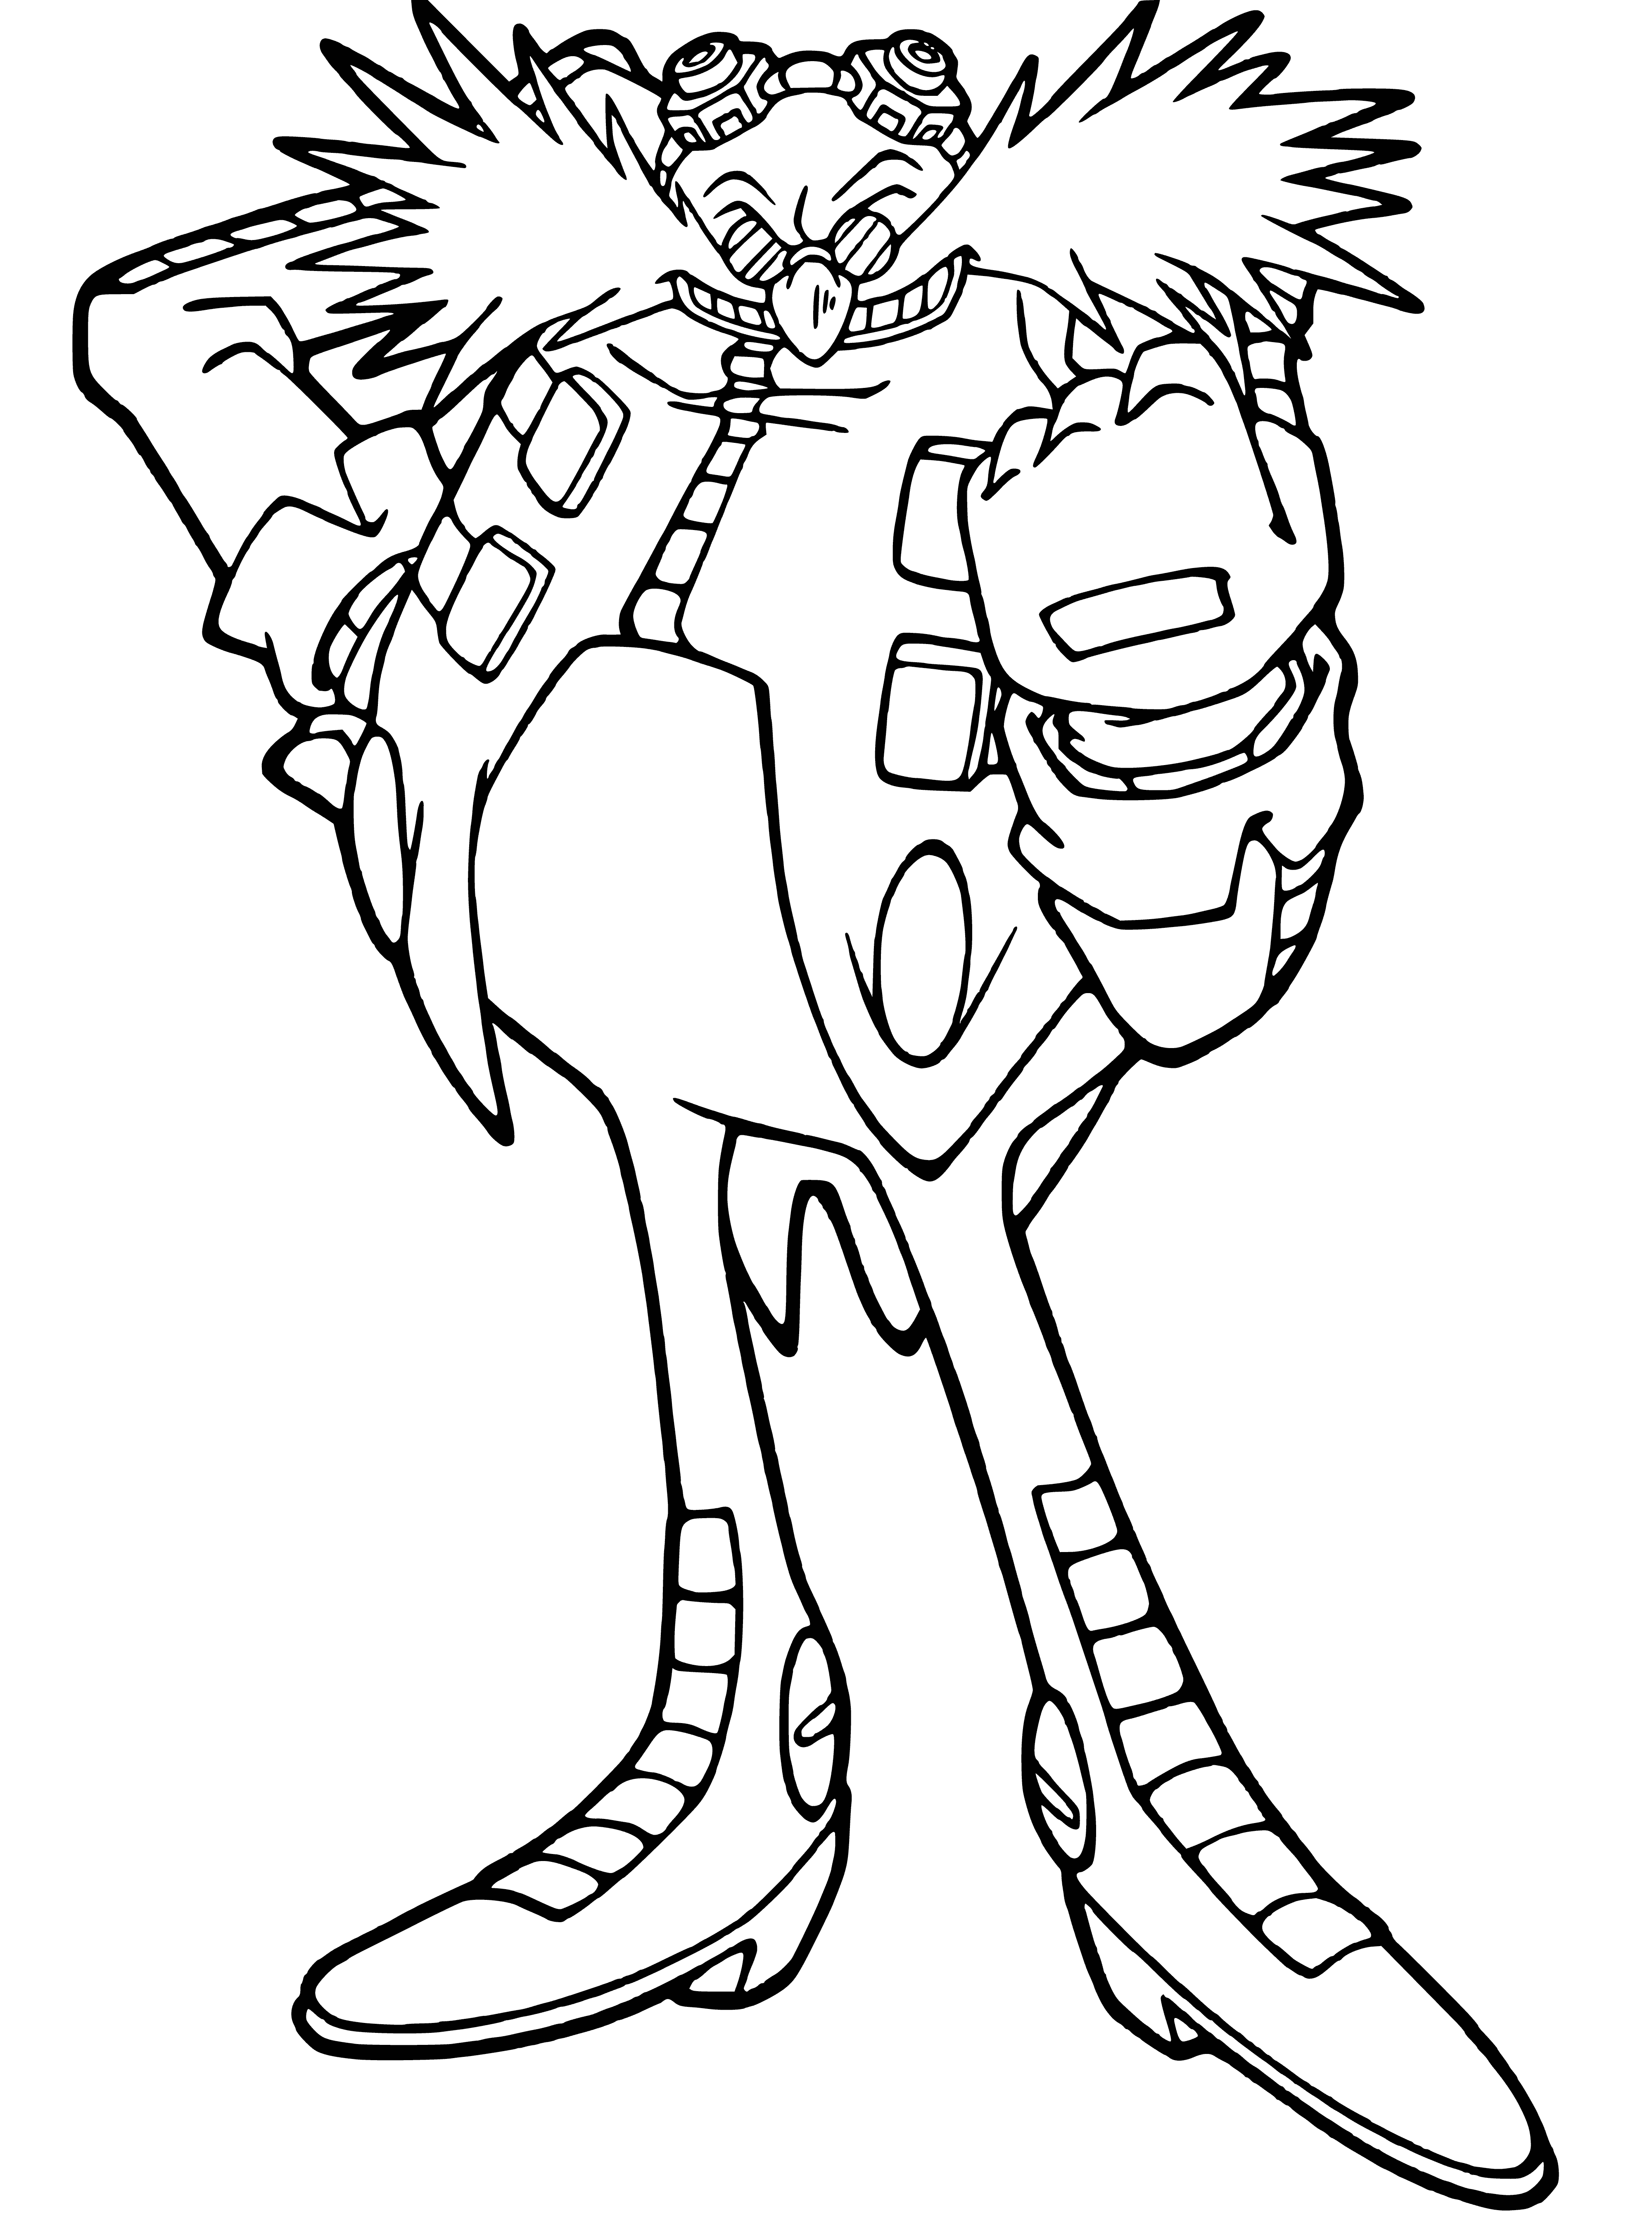 coloring page: Eggman: tall, thin man, large head, long nose, small eyes, bald but has some hair, red & yellow suit, metal machine & metal staff.